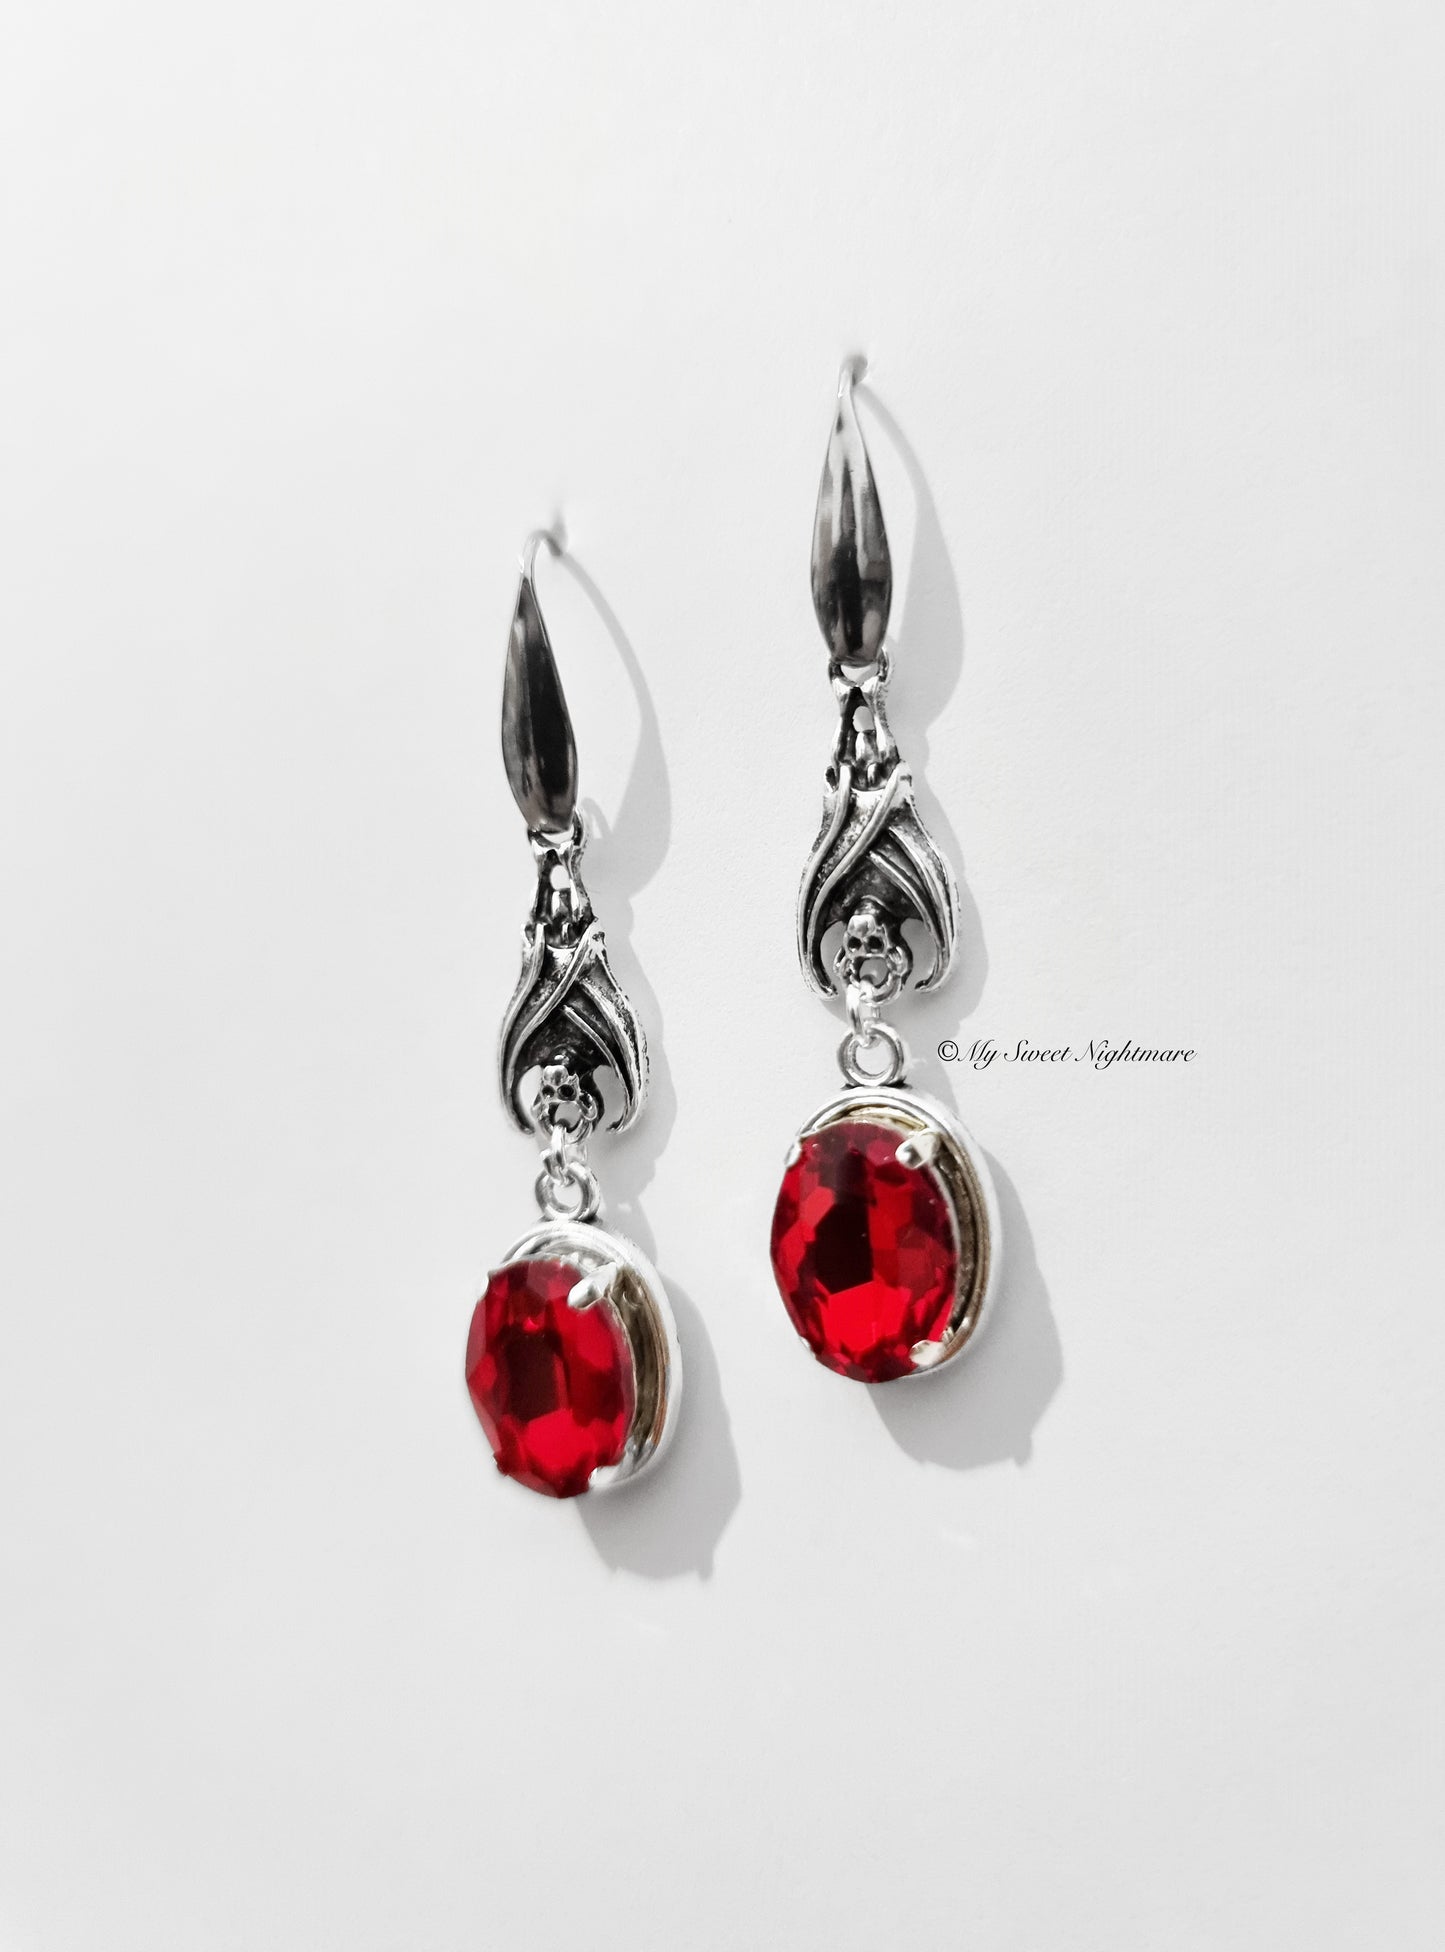 Earrings with bats and red gems